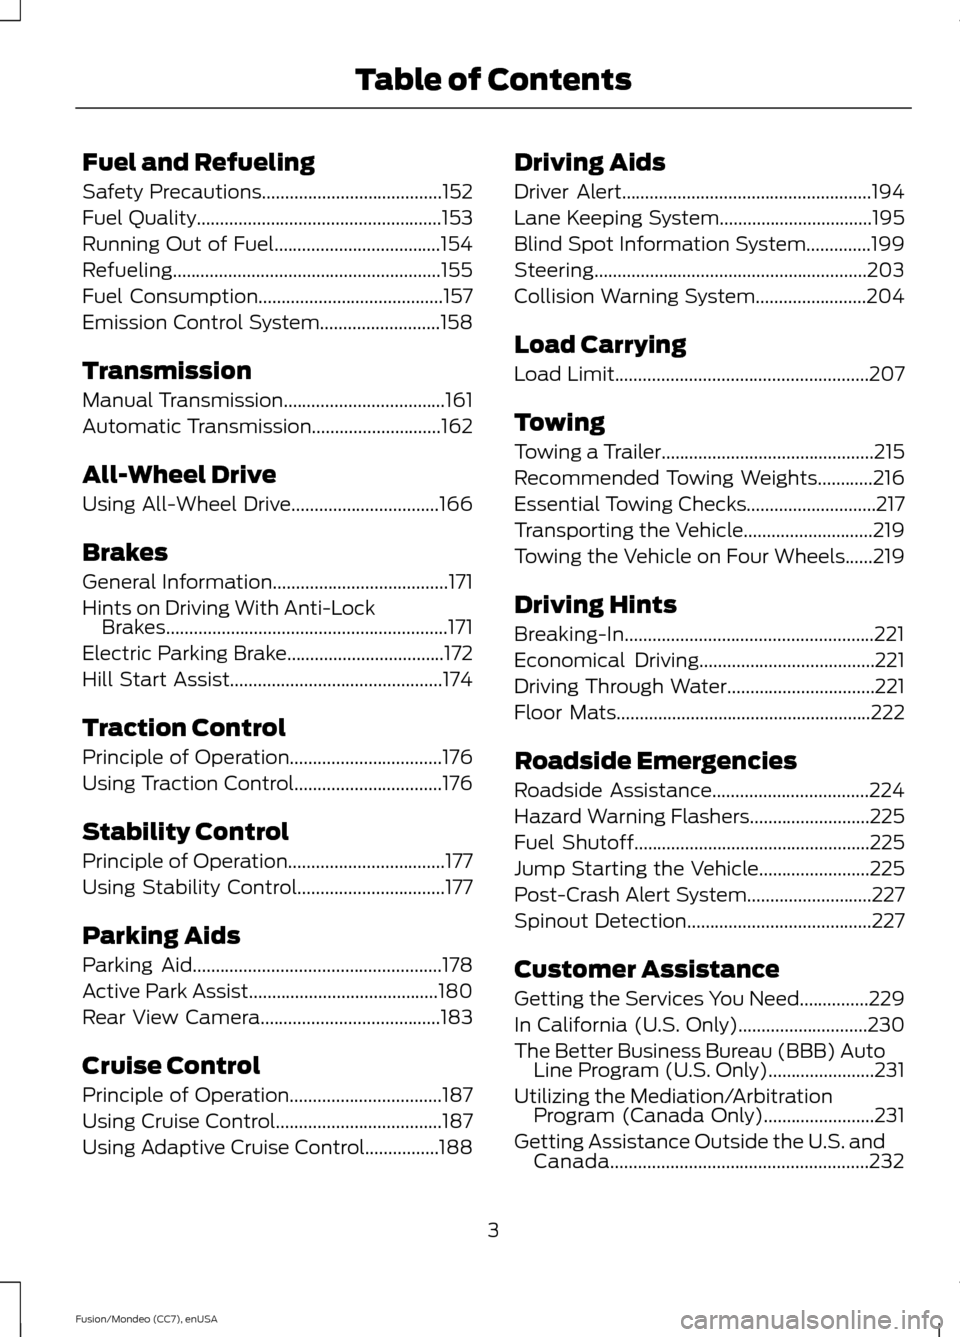 FORD FUSION (AMERICAS) 2015 2.G Owners Manual Fuel and Refueling
Safety Precautions.......................................152
Fuel Quality
.....................................................153
Running Out of Fuel...............................